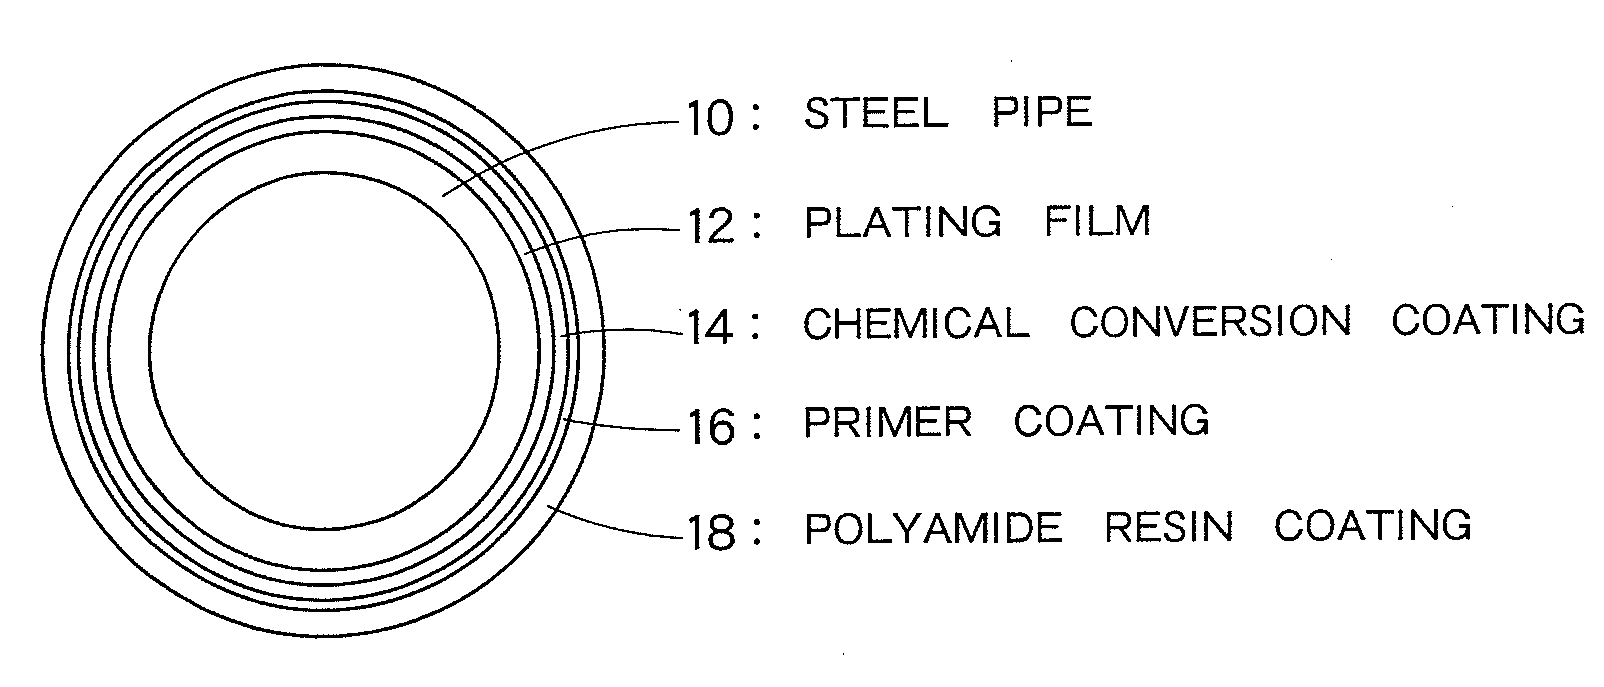 STEEL PIPE FOR VEHlCLE PIPING